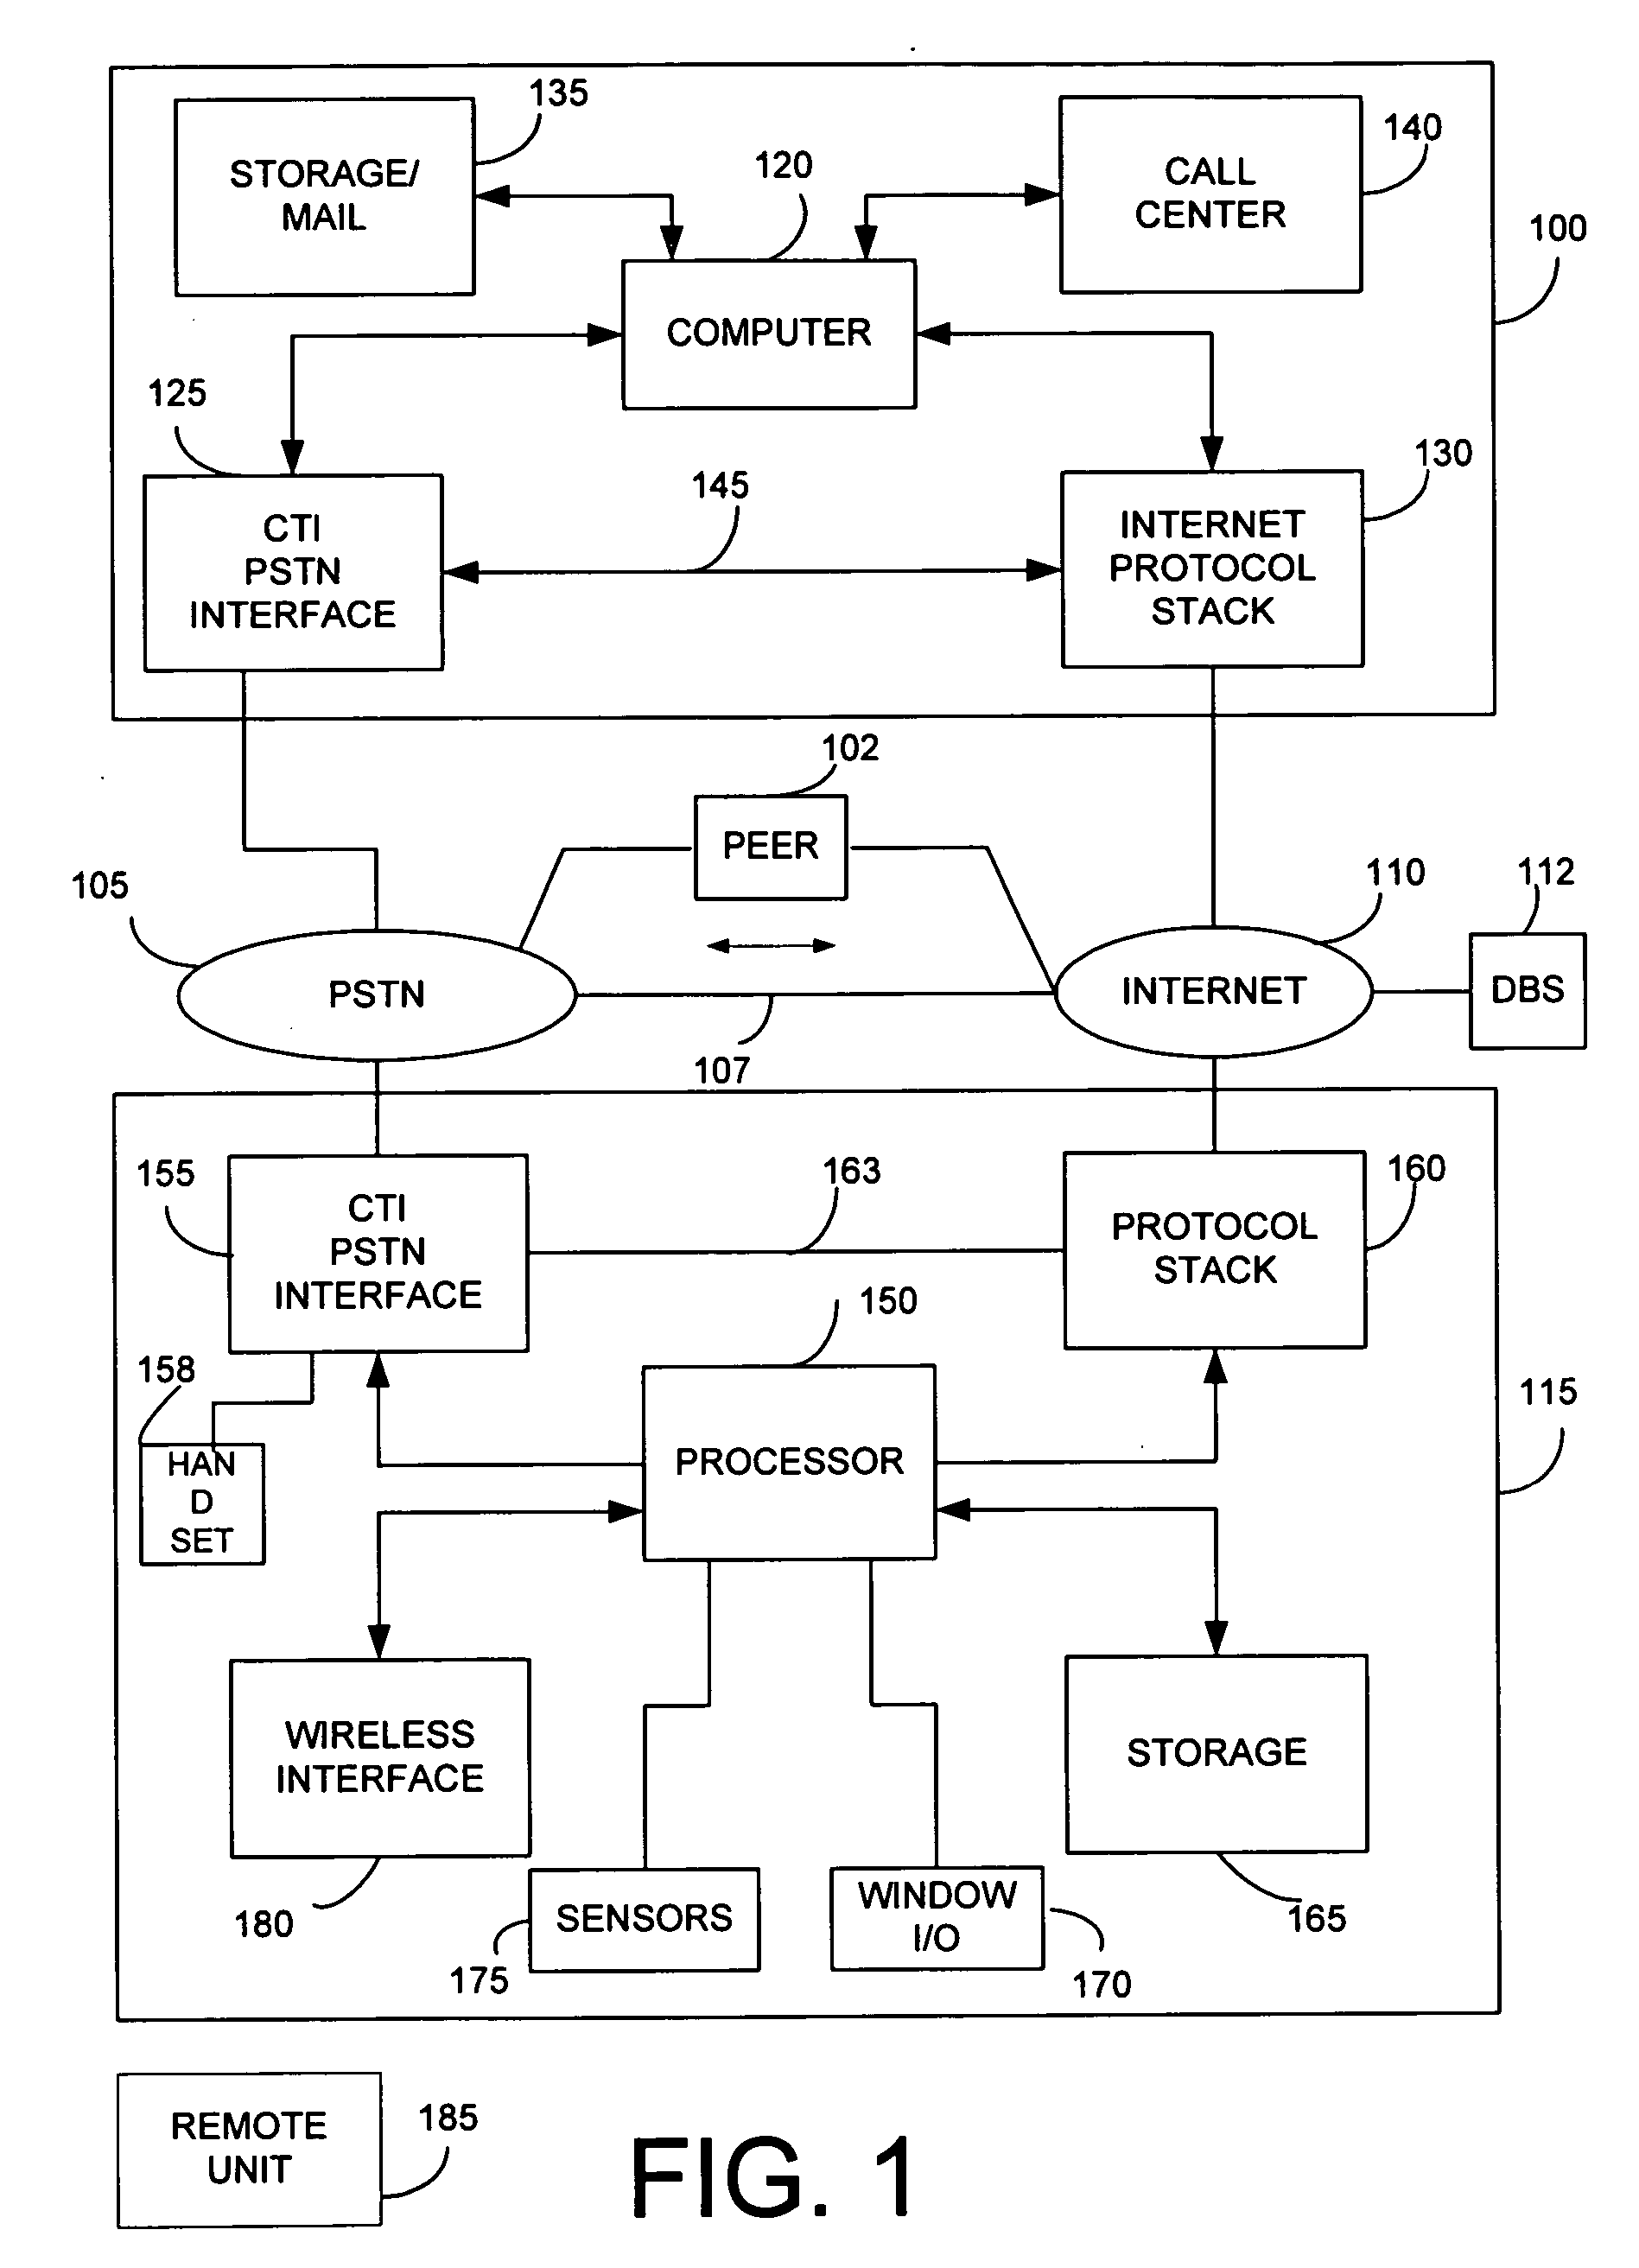 Method and apparatus for co-socket telephony